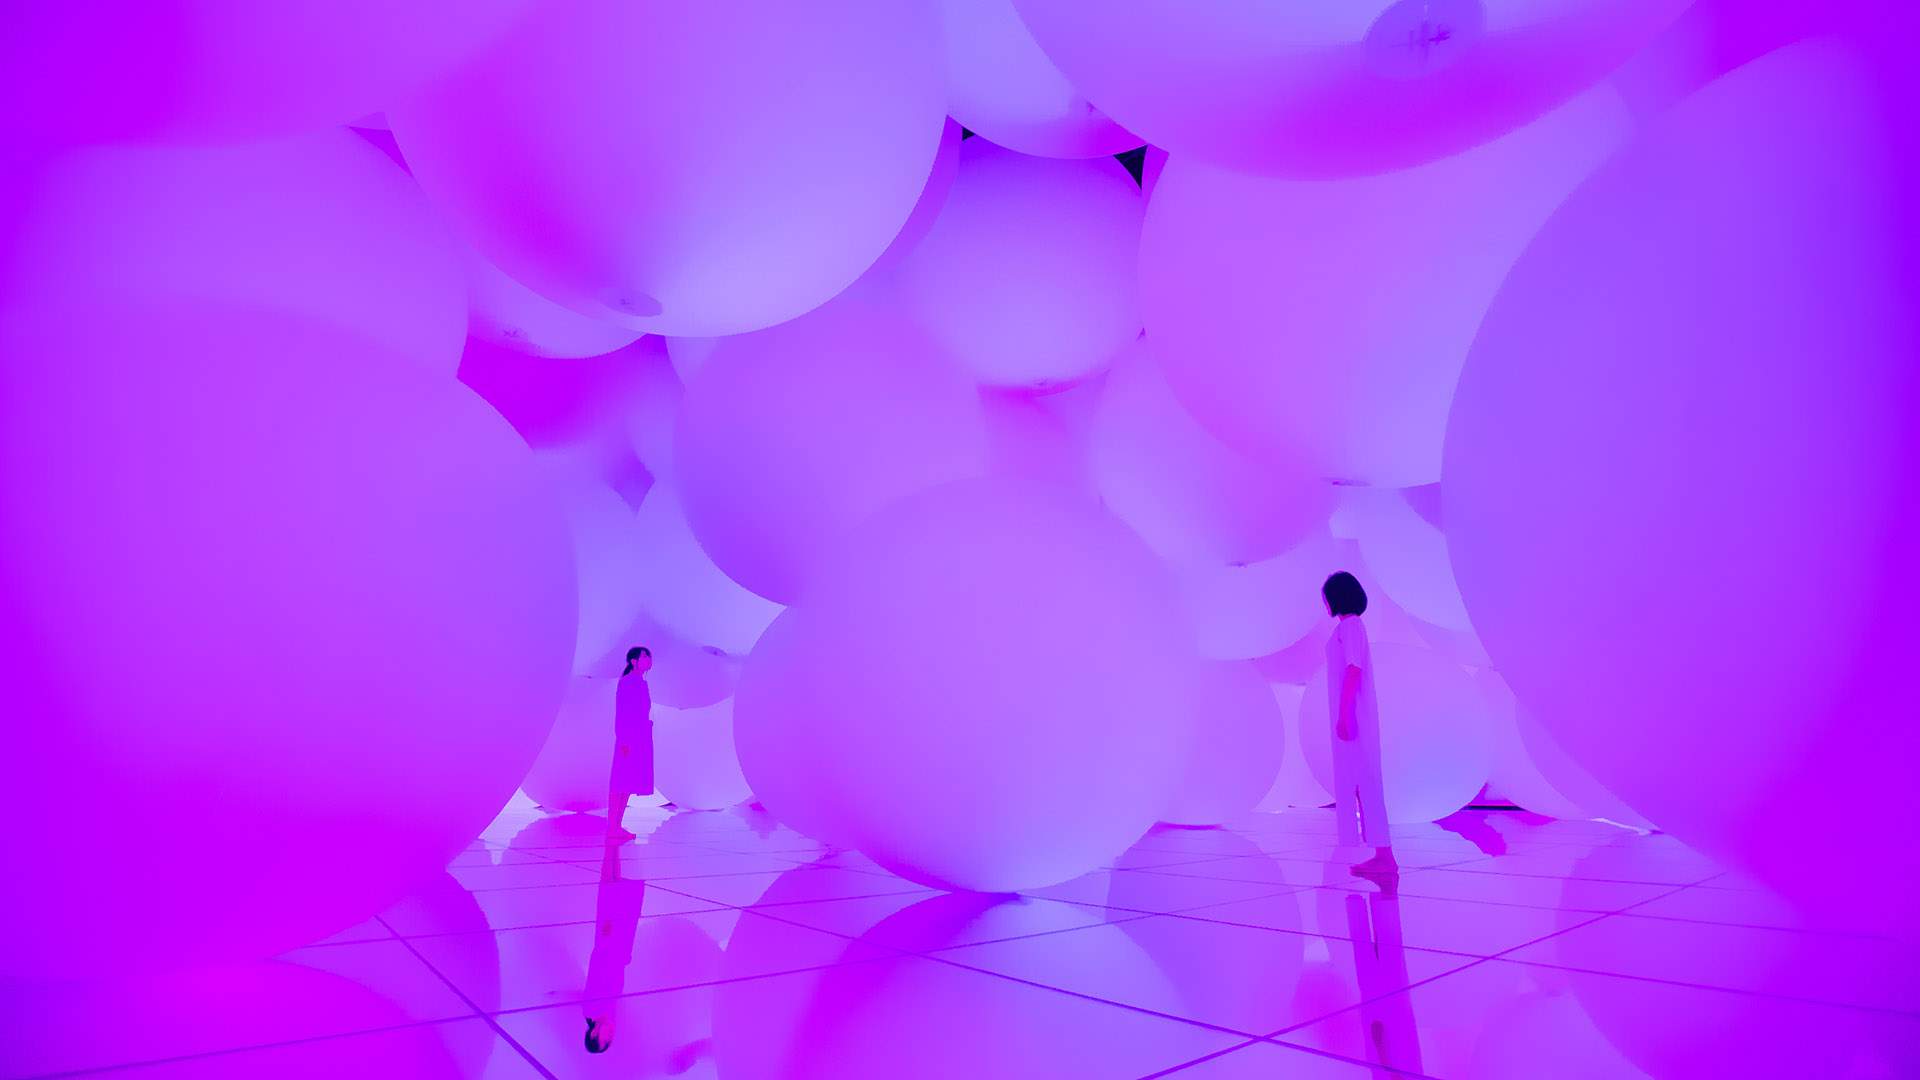 Teamlab Is Opening Another Vivid and Kaleidoscopic Digital-Only Art Museum